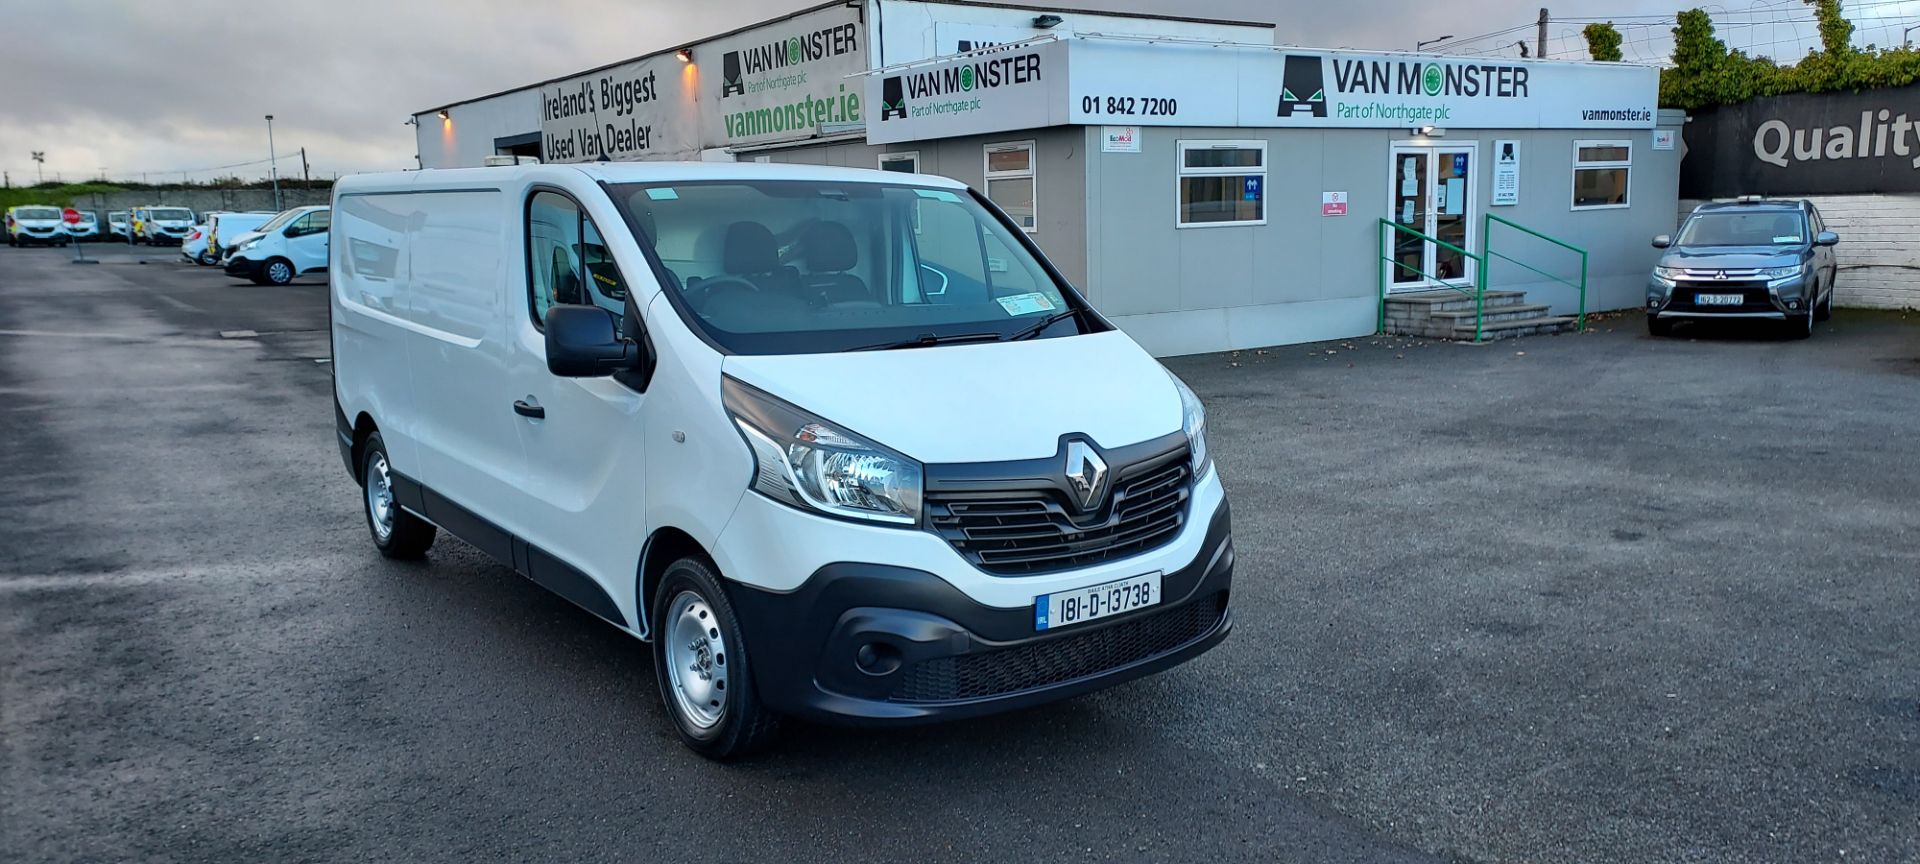 2018 Renault Trafic LL29 DCI 120 Business 3DR (181D13738) Image 1